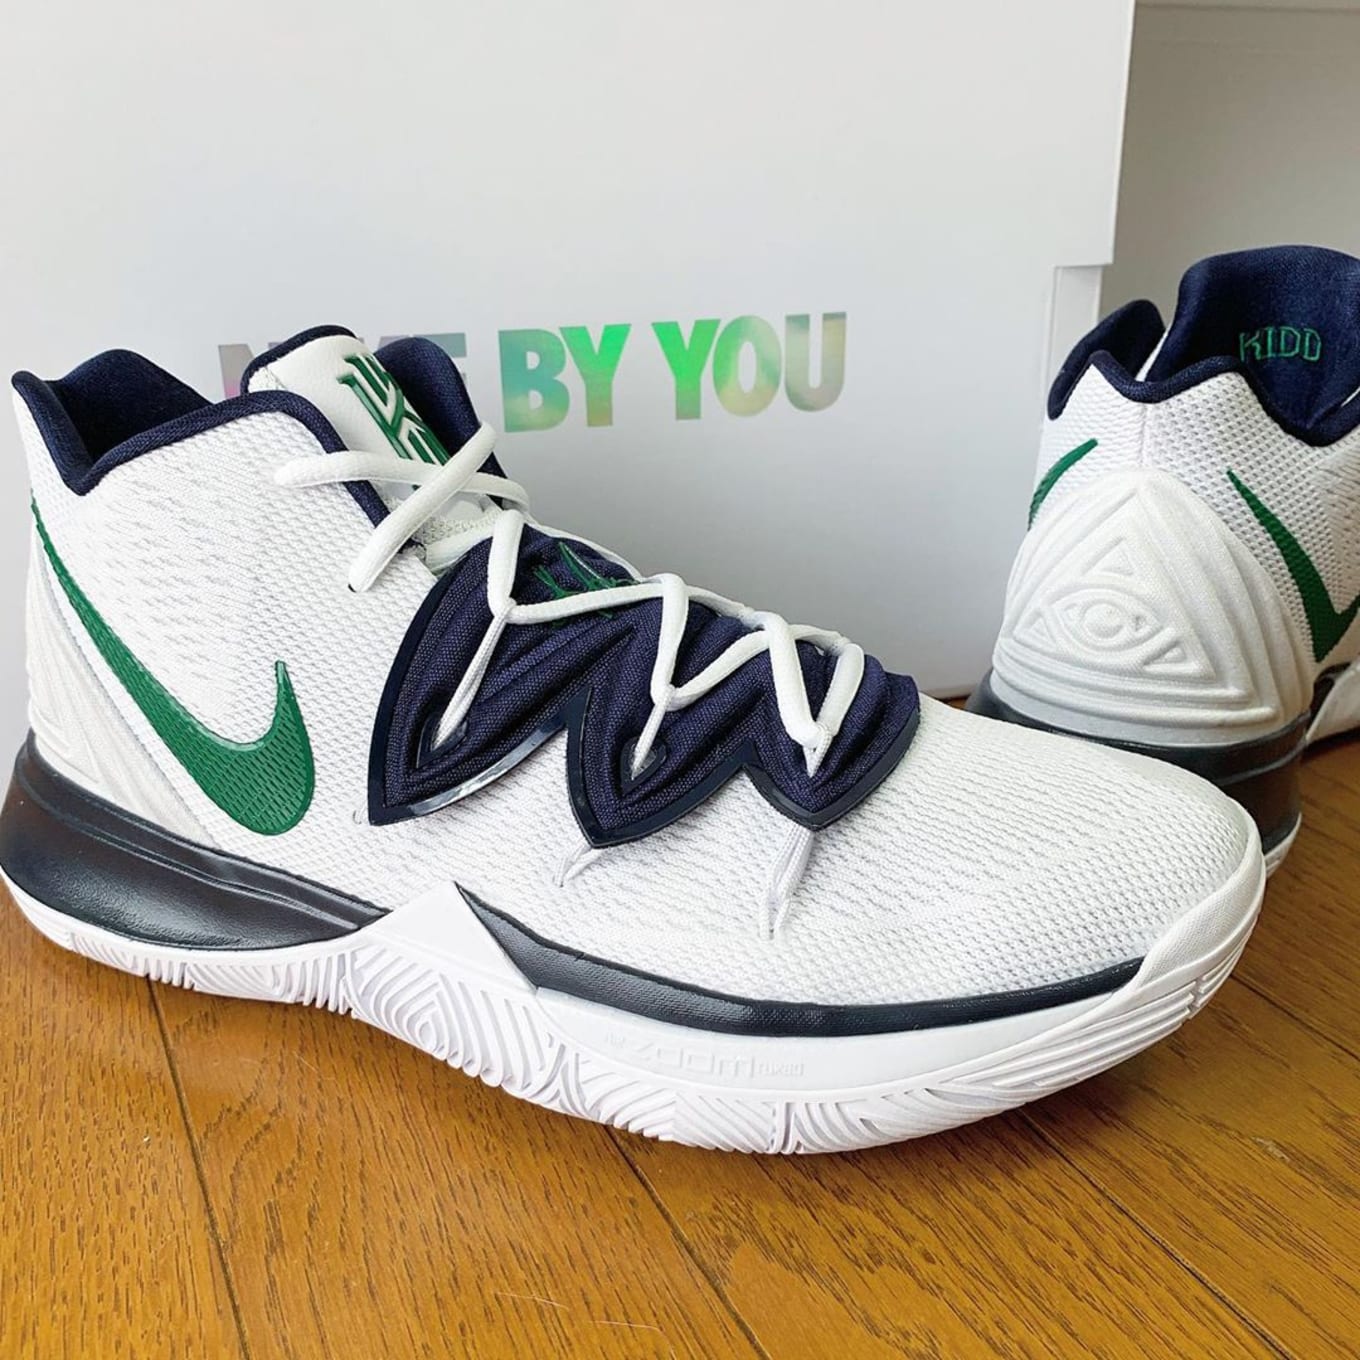 nike by you kyrie 5